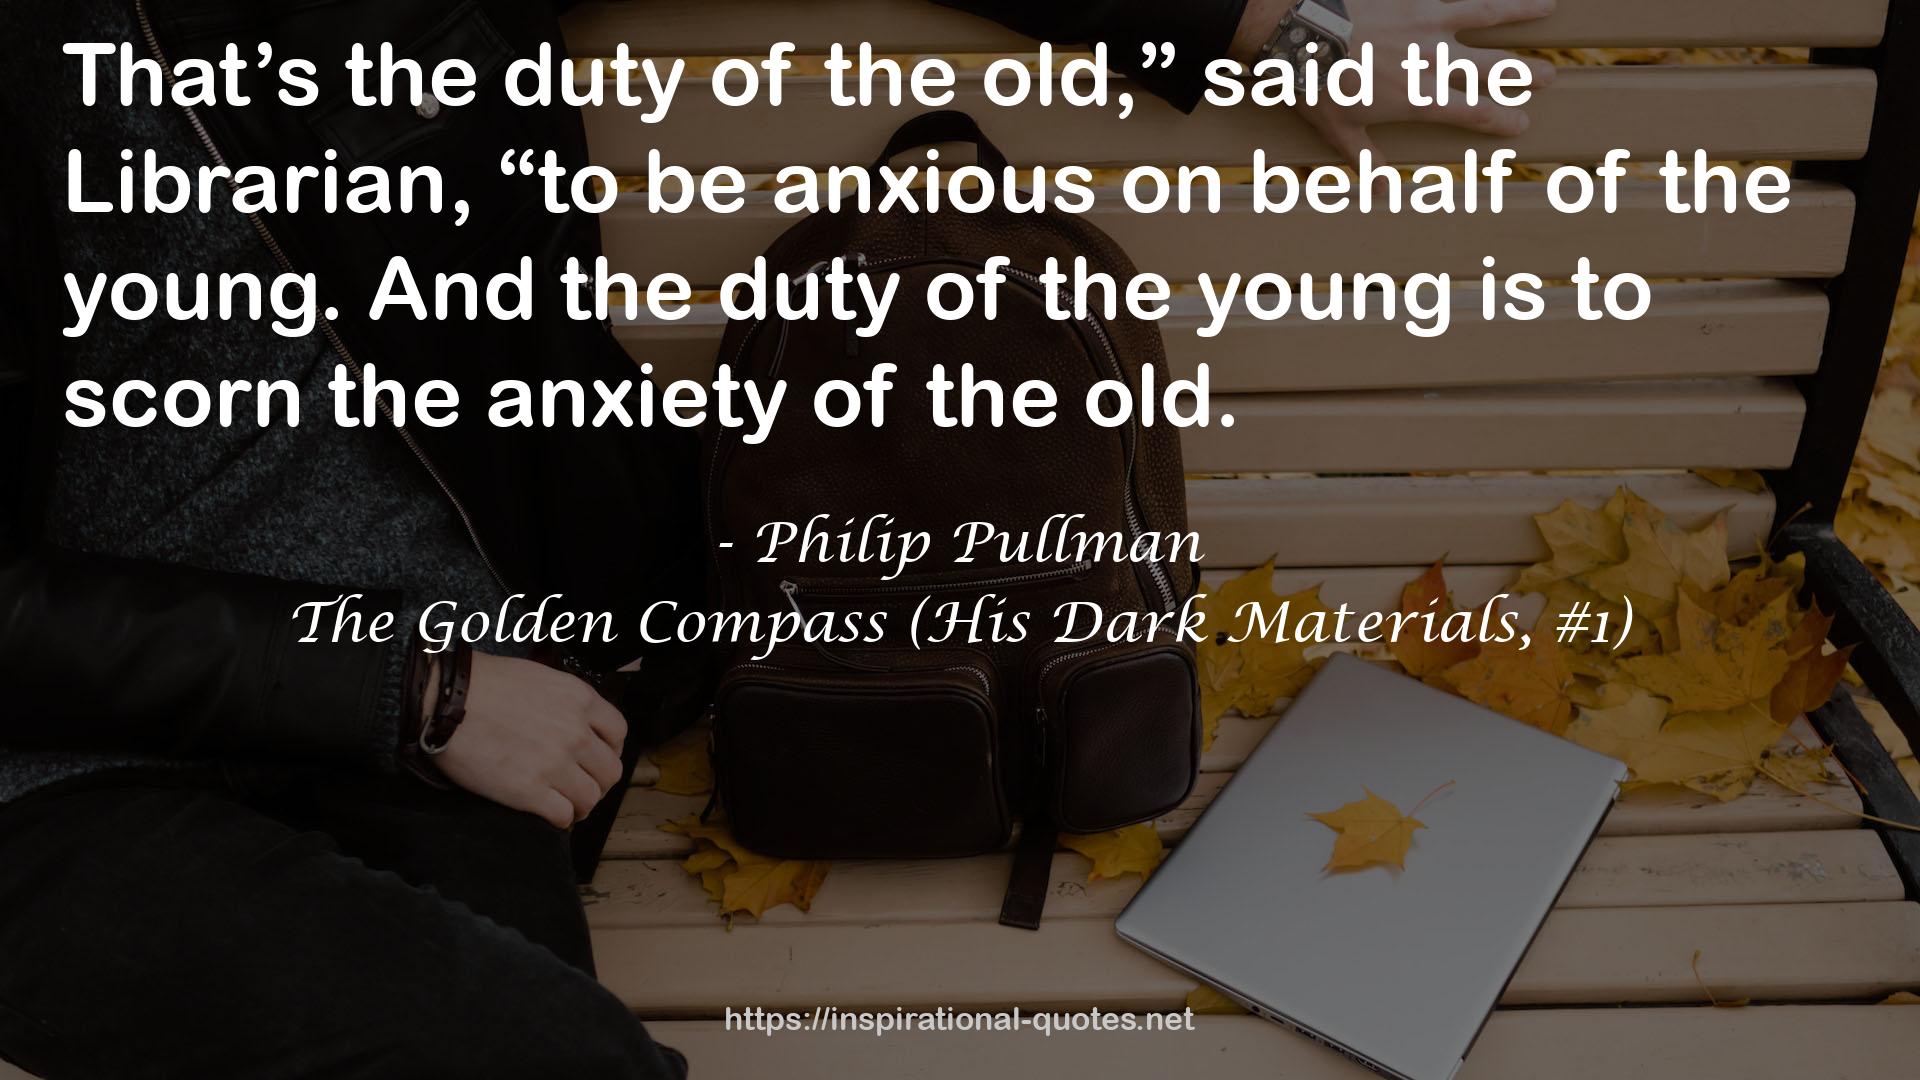 The Golden Compass (His Dark Materials, #1) QUOTES